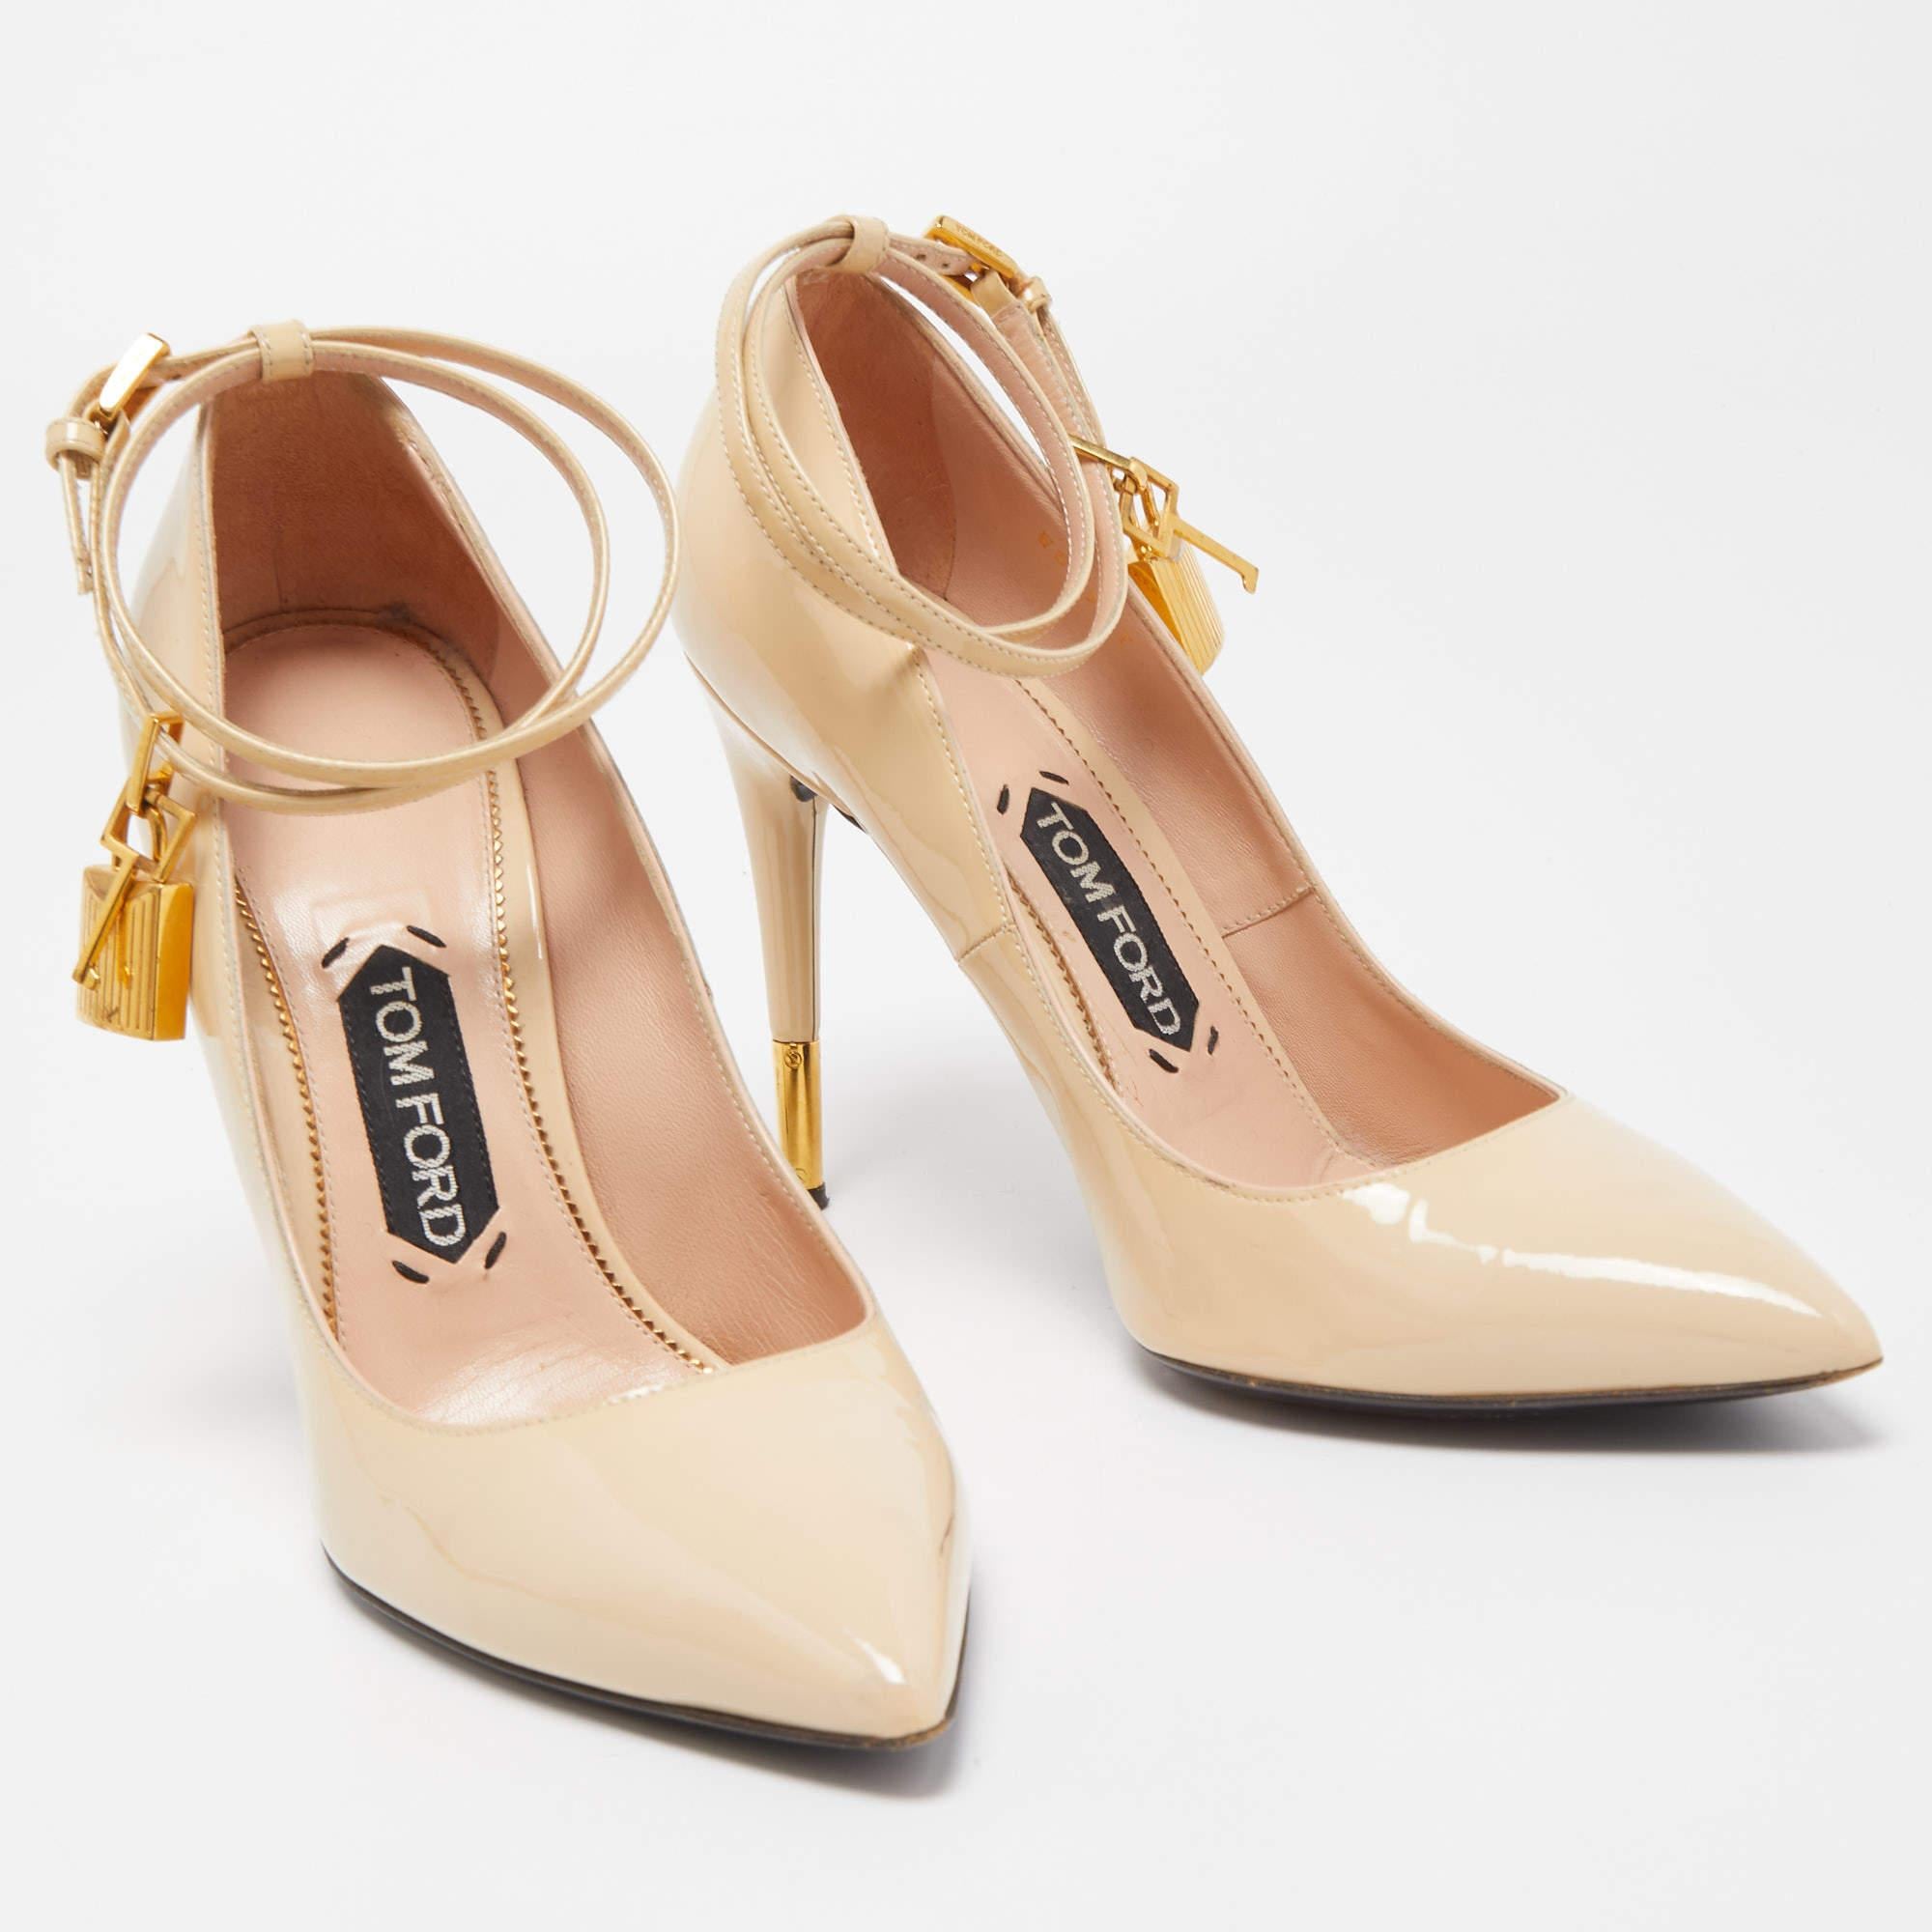 Tom Ford Cream Patent Leather Padlock Ankle Strap Pumps Size 38.5 1